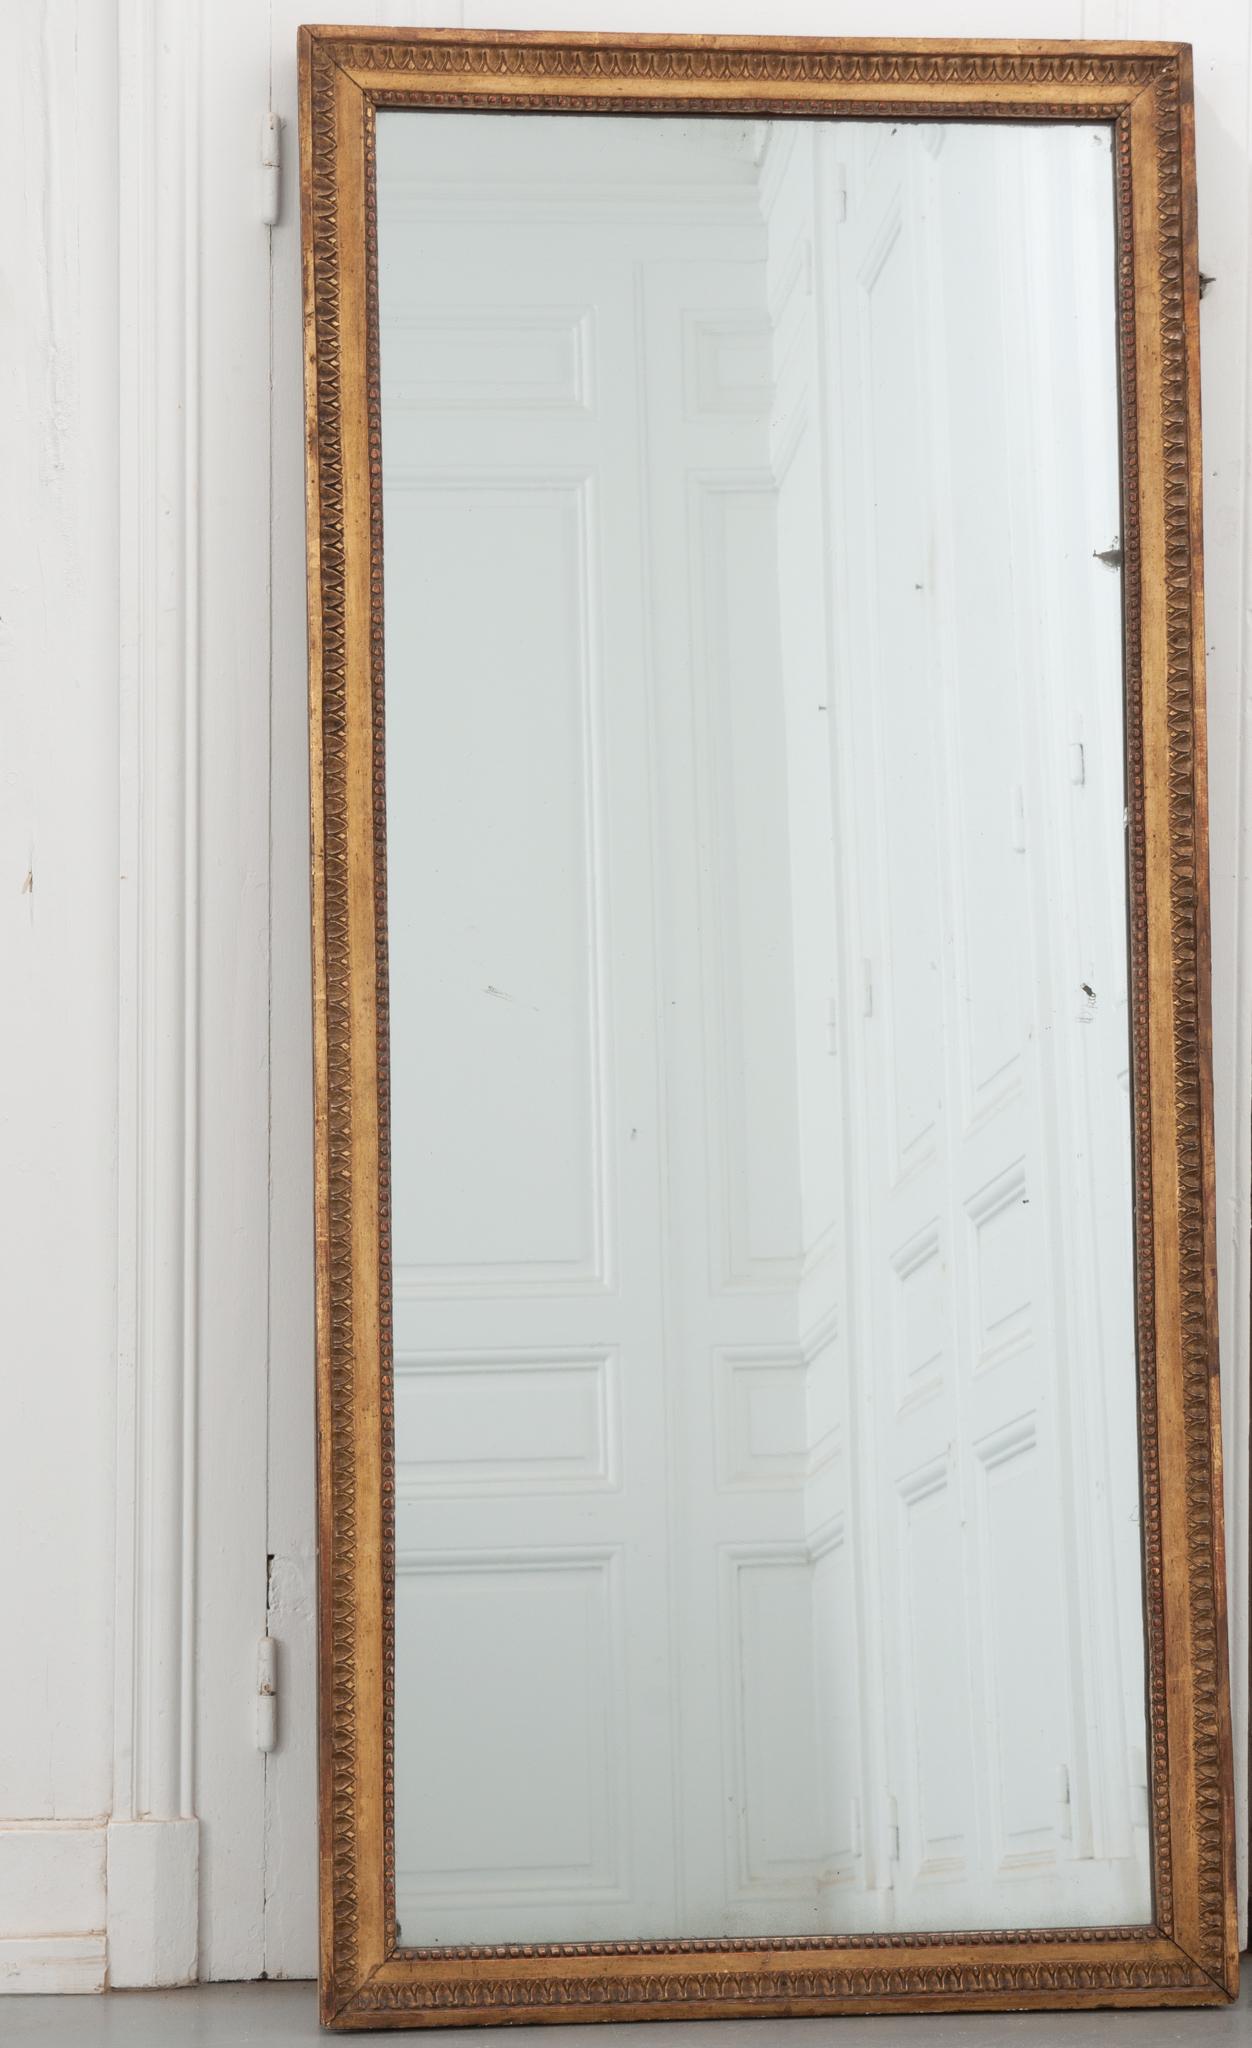 A perfectly sophisticated Dutch Regency giltwood mirror, circa 1810. Perimeters of lamb's tongue and bead outline the original mirror. The symmetrical giltwood frame has worn slightly with time and use, giving it a wonderful patina. Some signs of